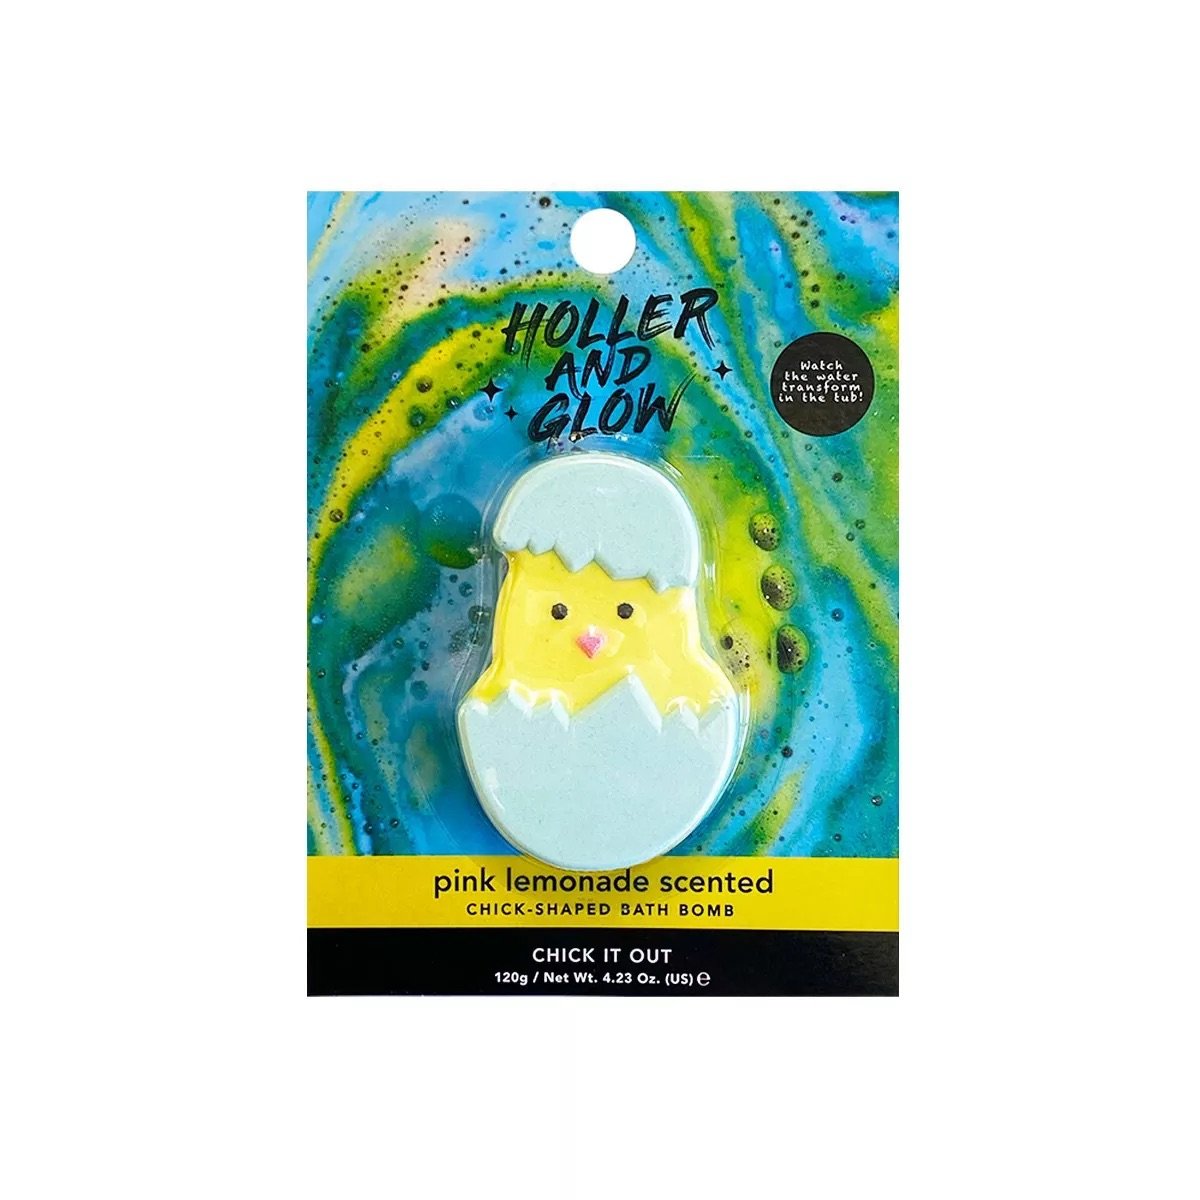 Holler and Glow Chick Chick It Out Bath Bomb.jpeg